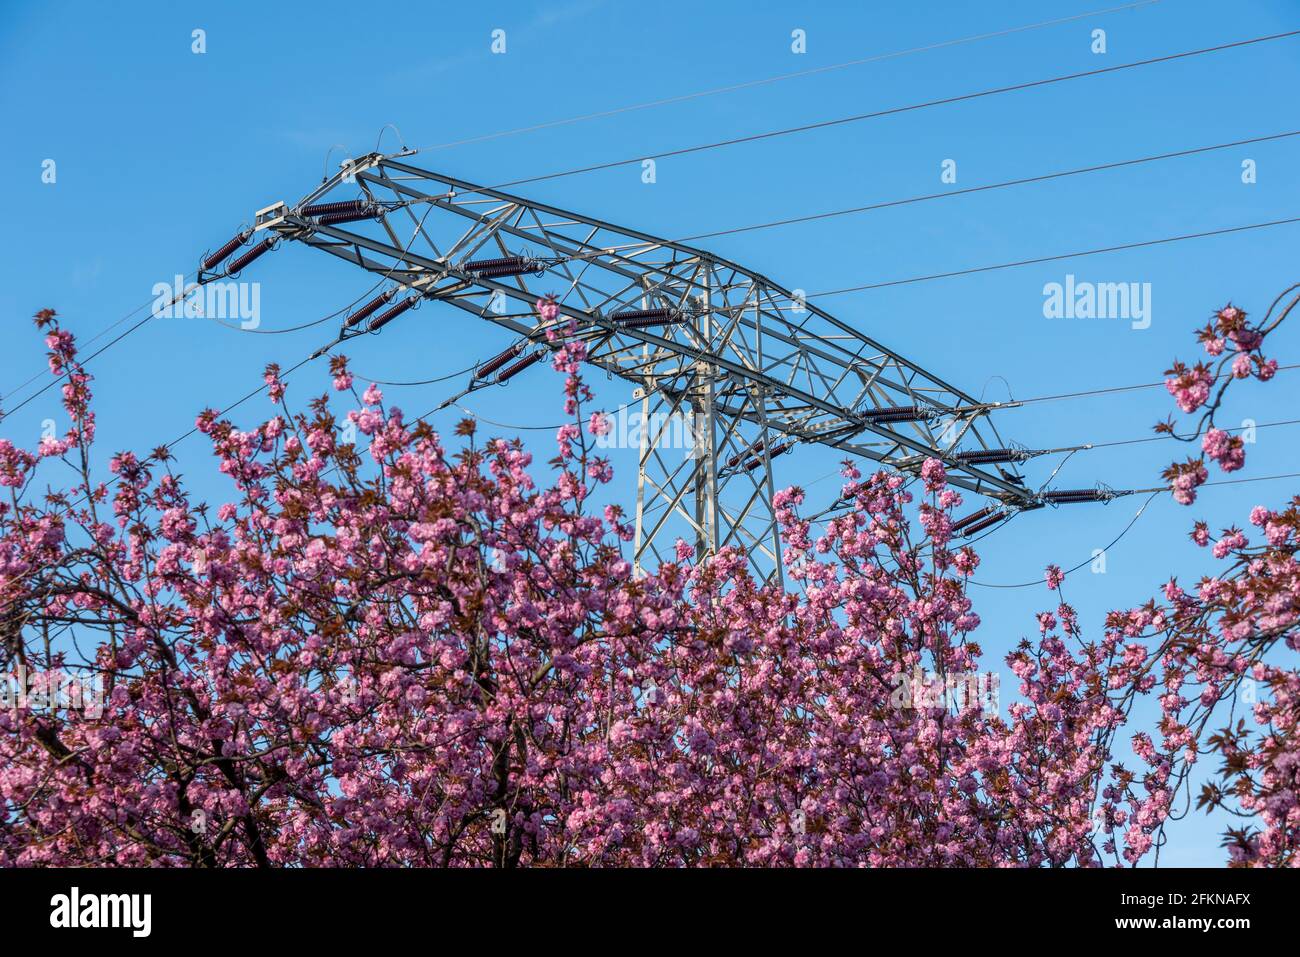 Japanese ornamental cherries in blossom, electricity pole Stock Photo